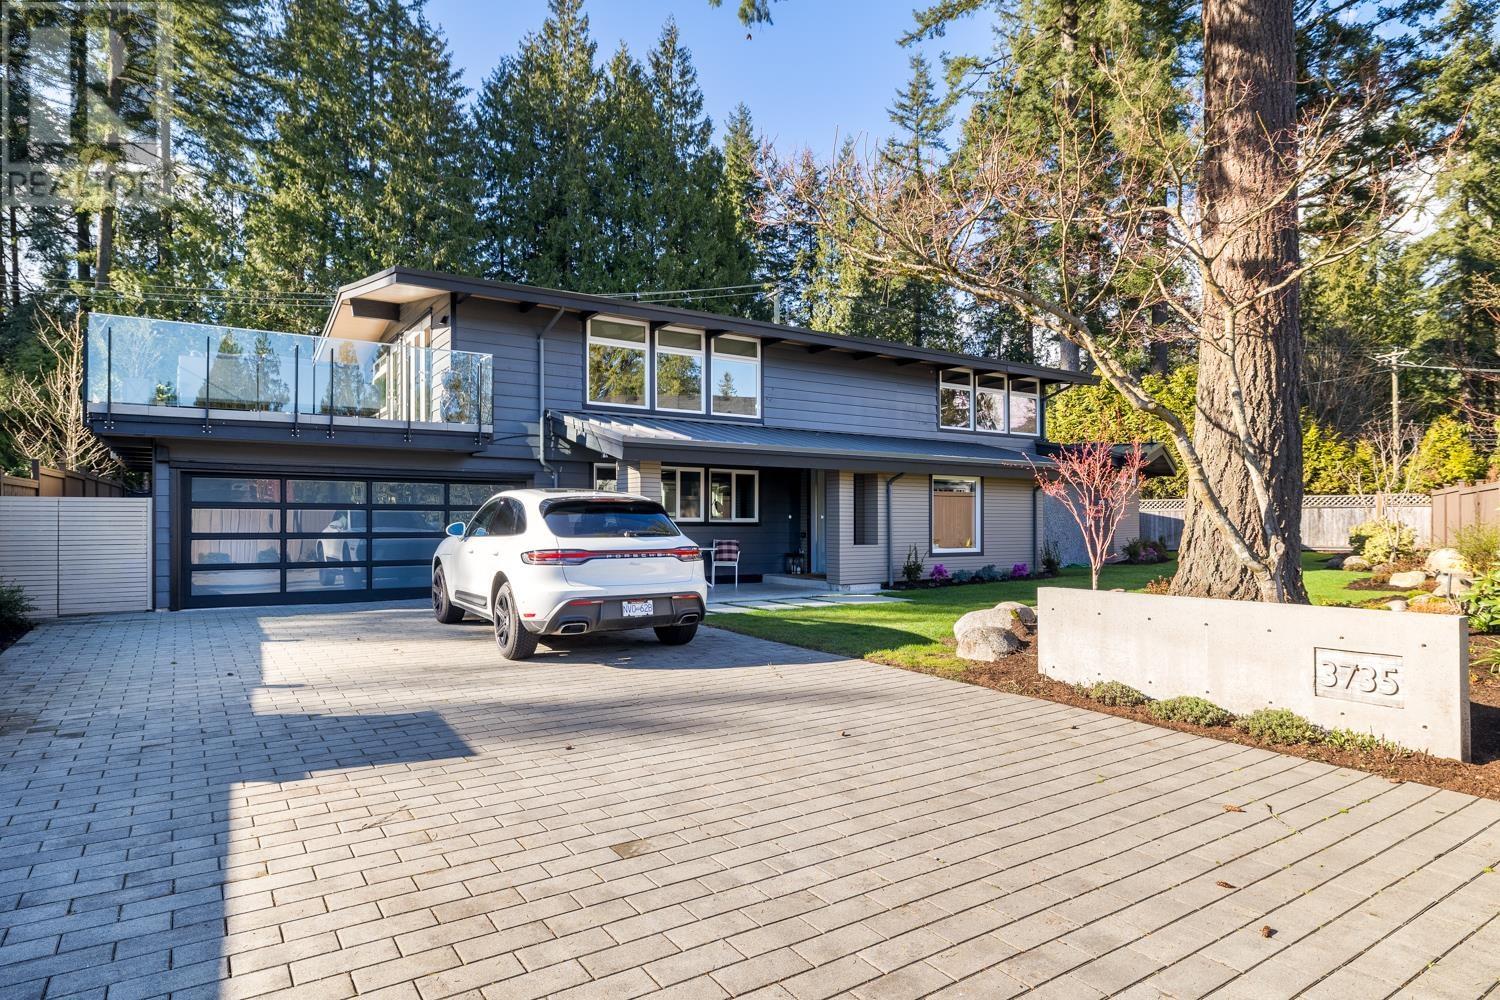 3735 RIVIERE PLACE, north vancouver, British Columbia